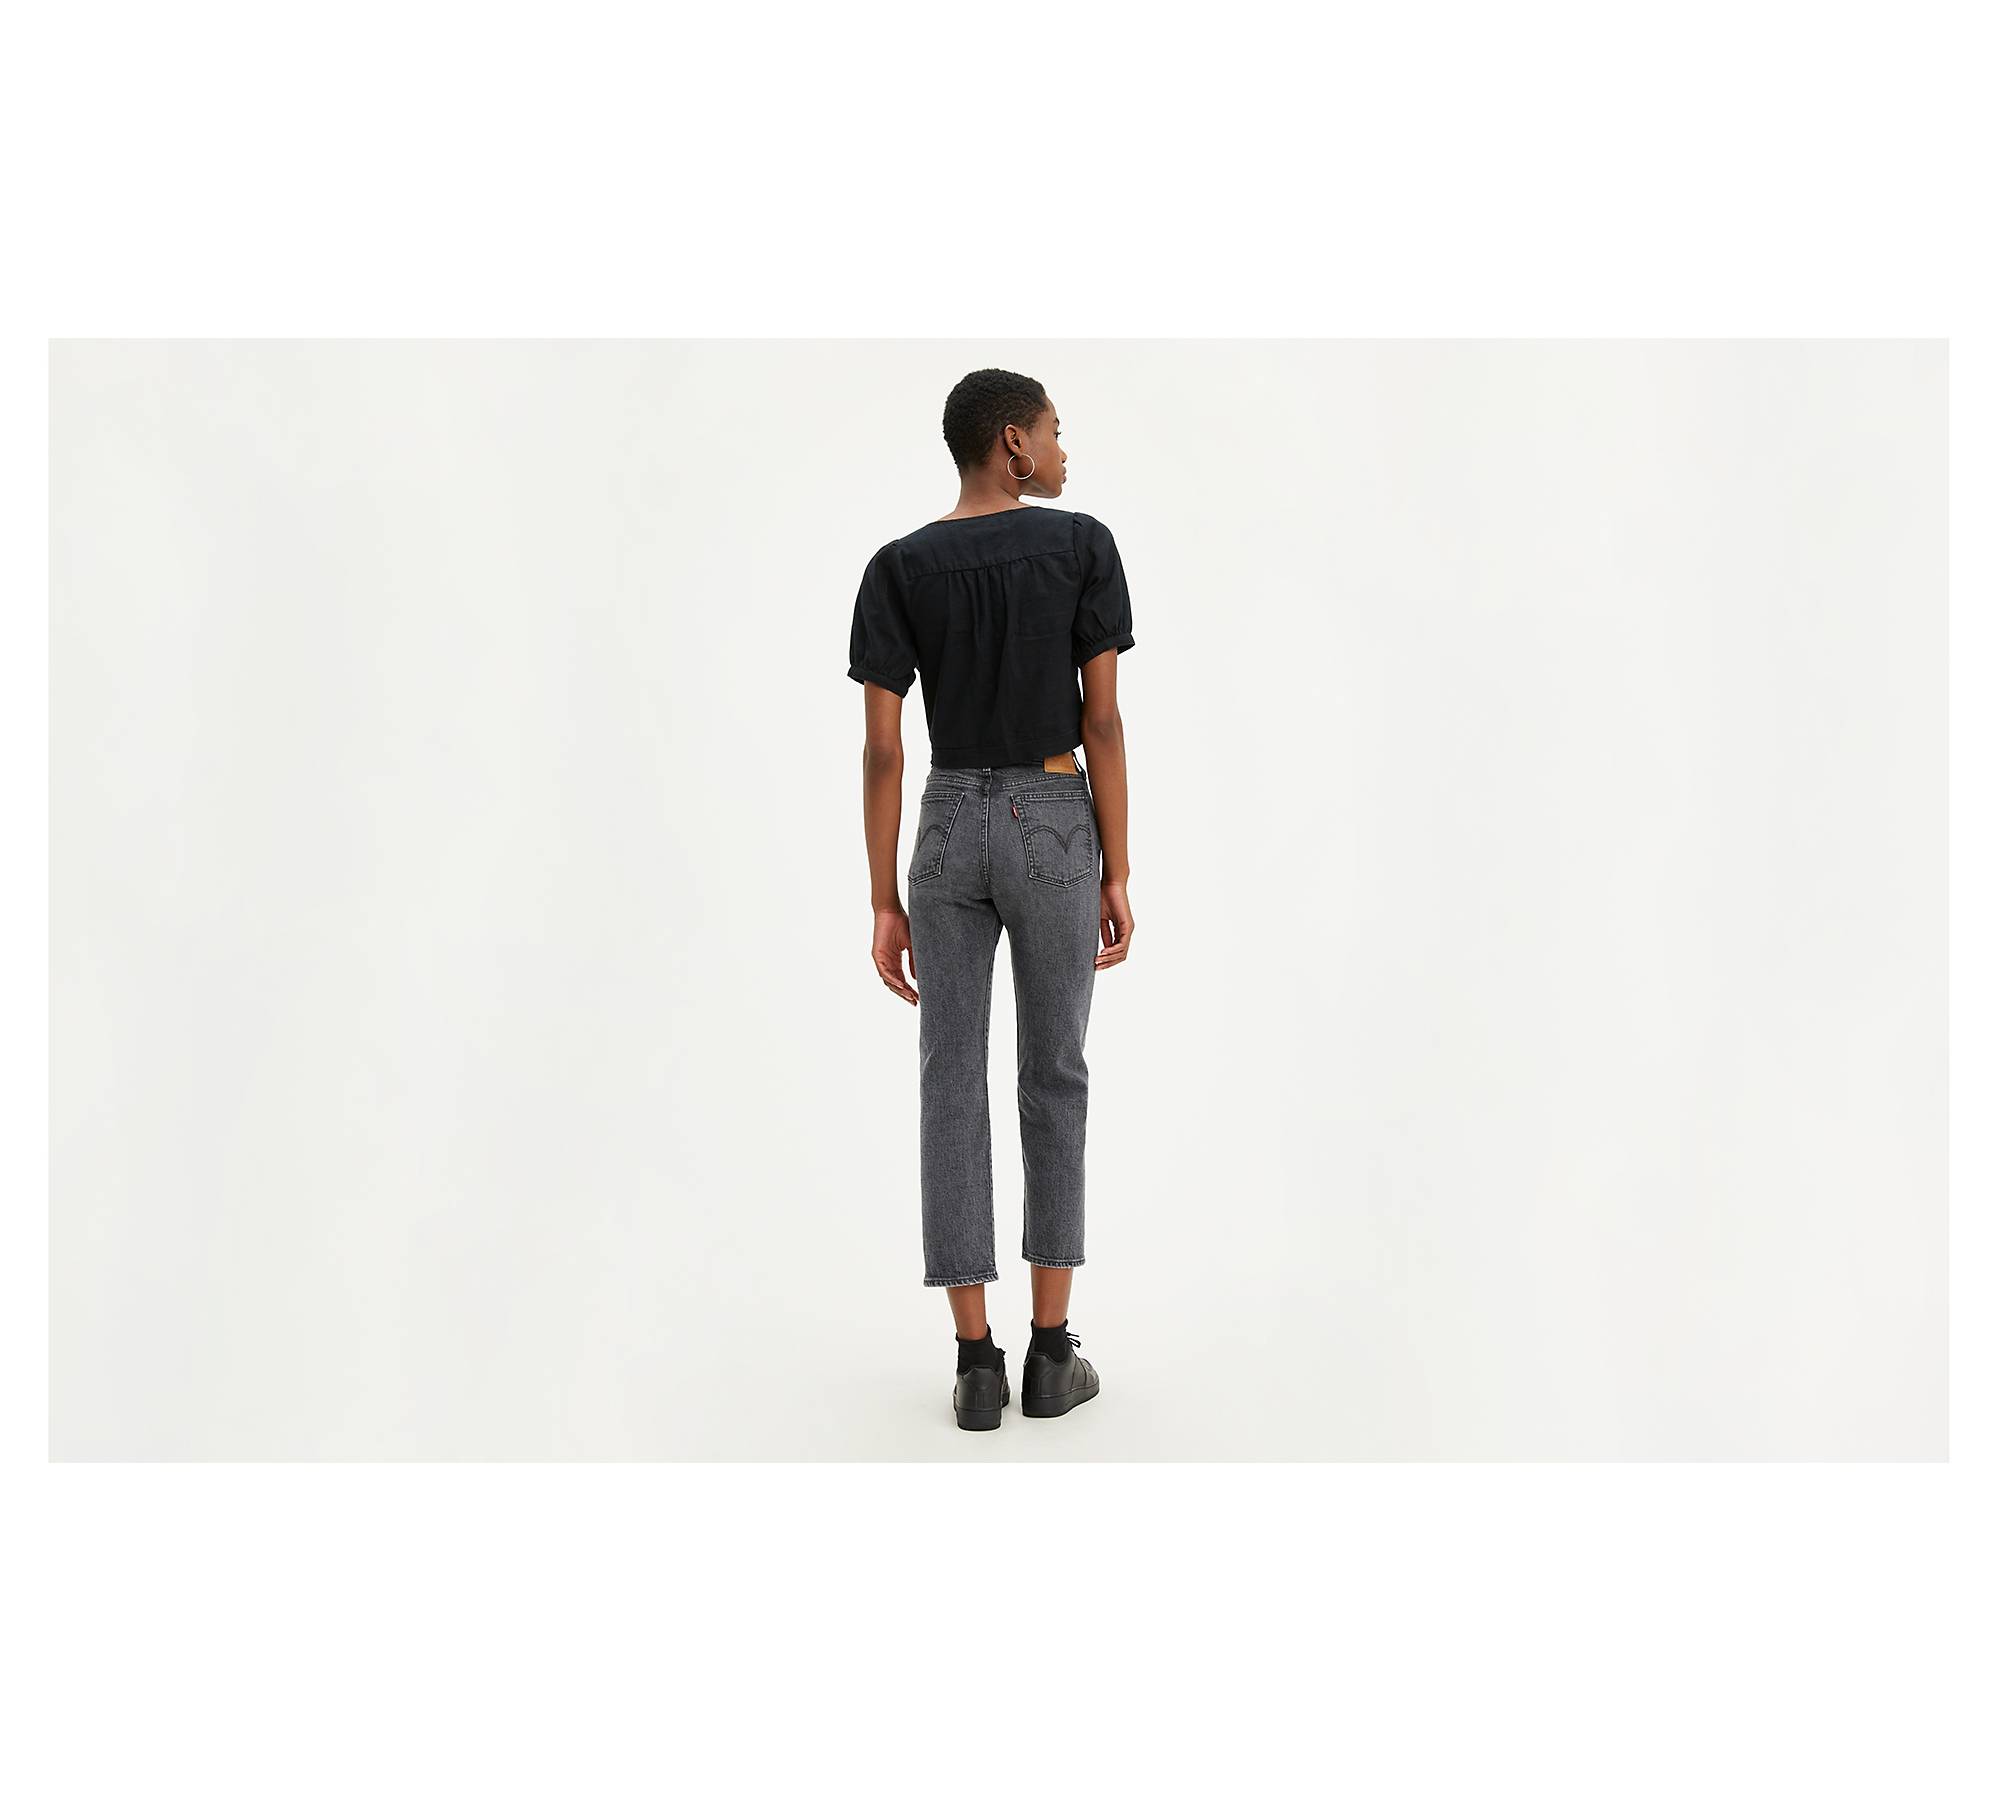 Levi's Wedgie Straight Jeans in Black • Shop American Threads Women's  Trendy Online Boutique – americanthreads